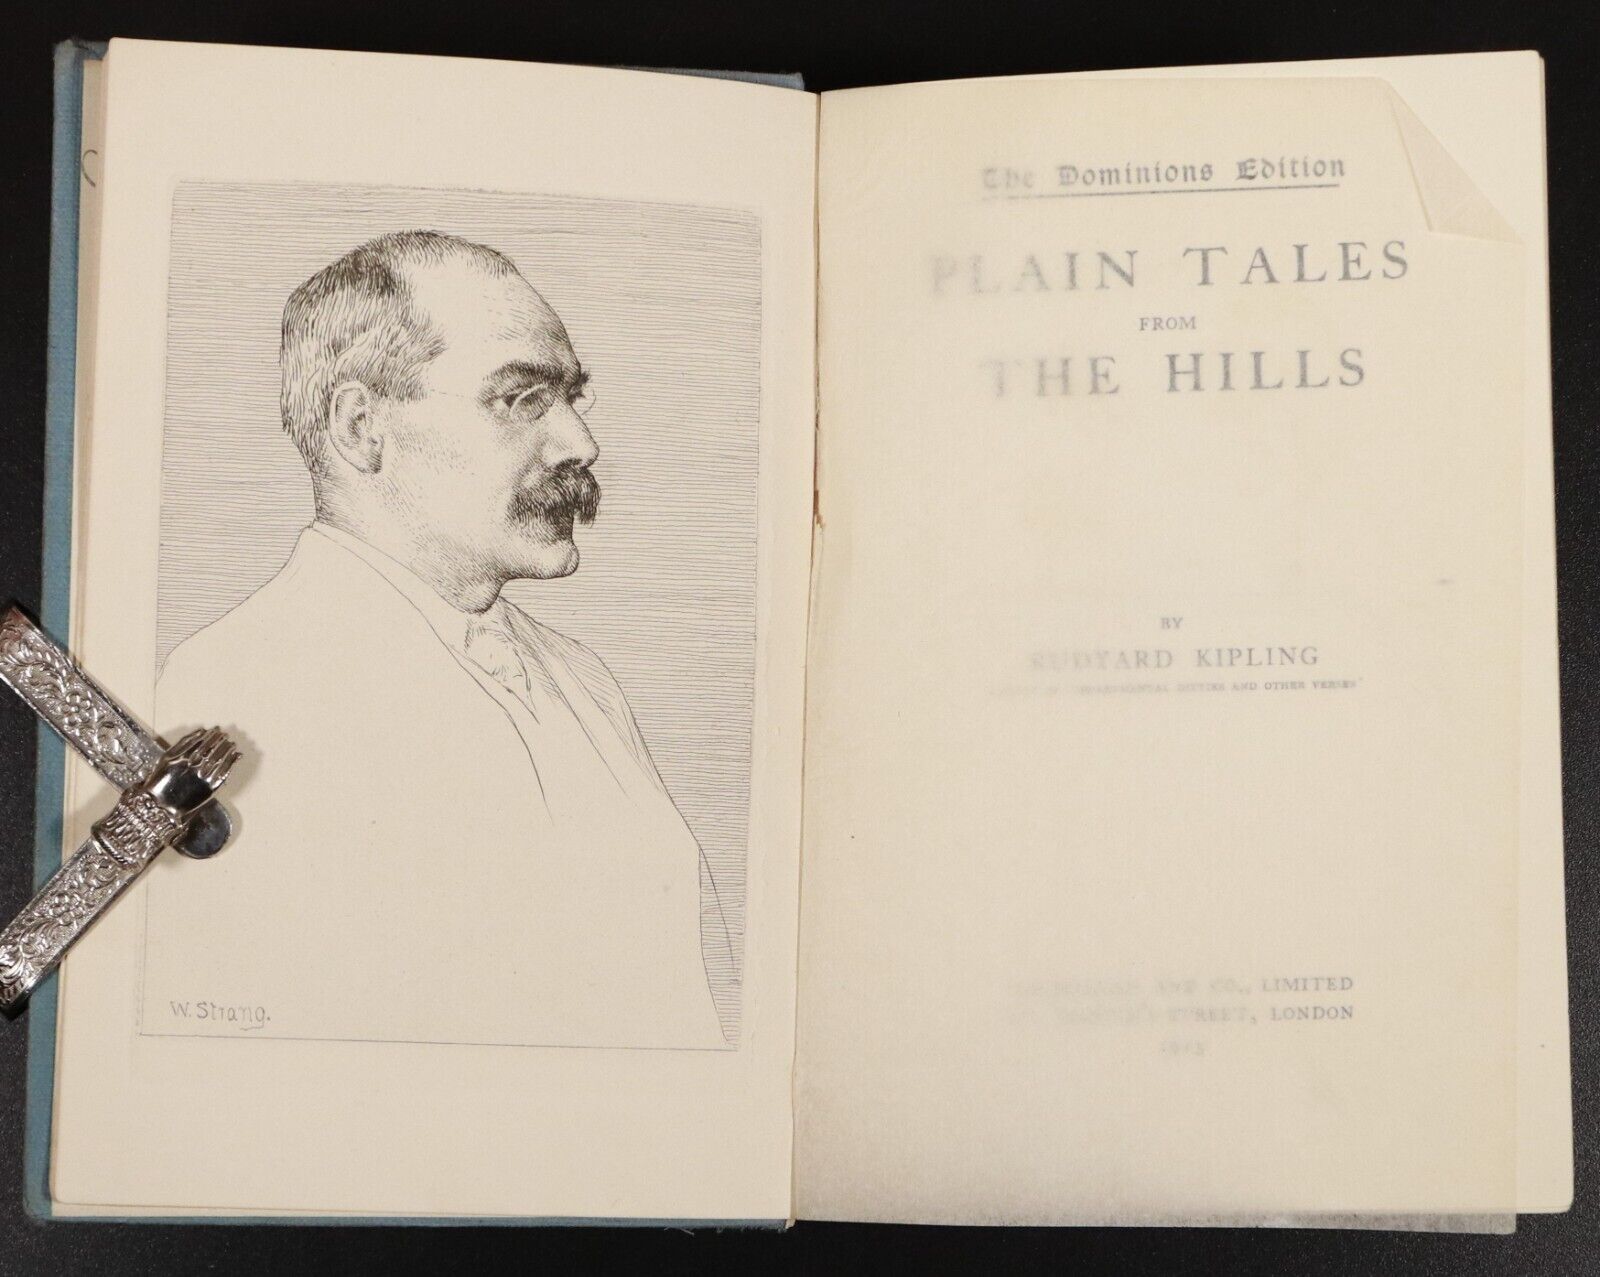 1913 Plain Tales From The Hills by Rudyard Kipling Antique Fiction Book - 0